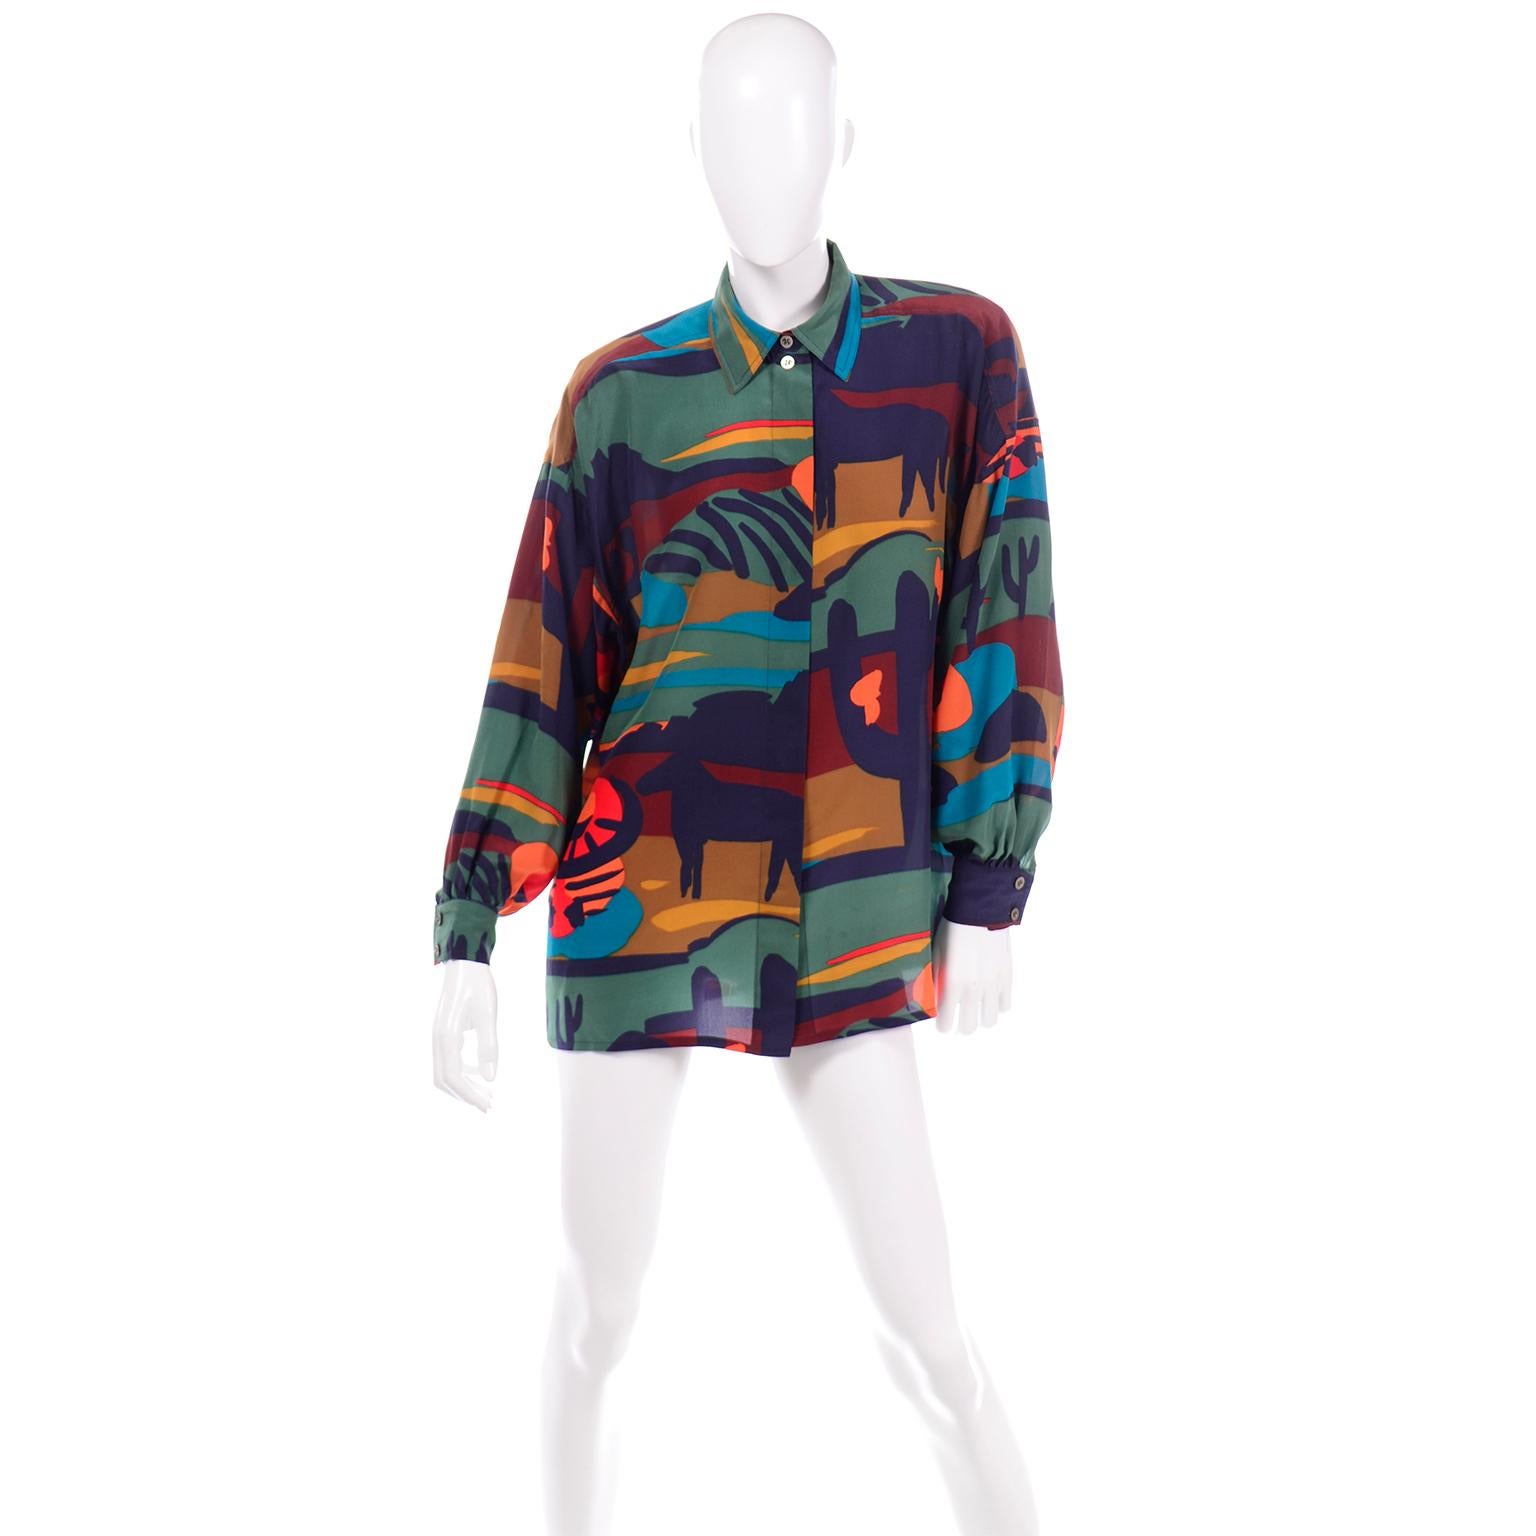 This vintage 1980's Margaretha Ley Escada long sleeve blouse is in a Western theme novelty print that resembles painted brush strokes. The top is in shades of navy, teal, orange, red, mustard, marigold, and burgundy. The placket of the shirt hides